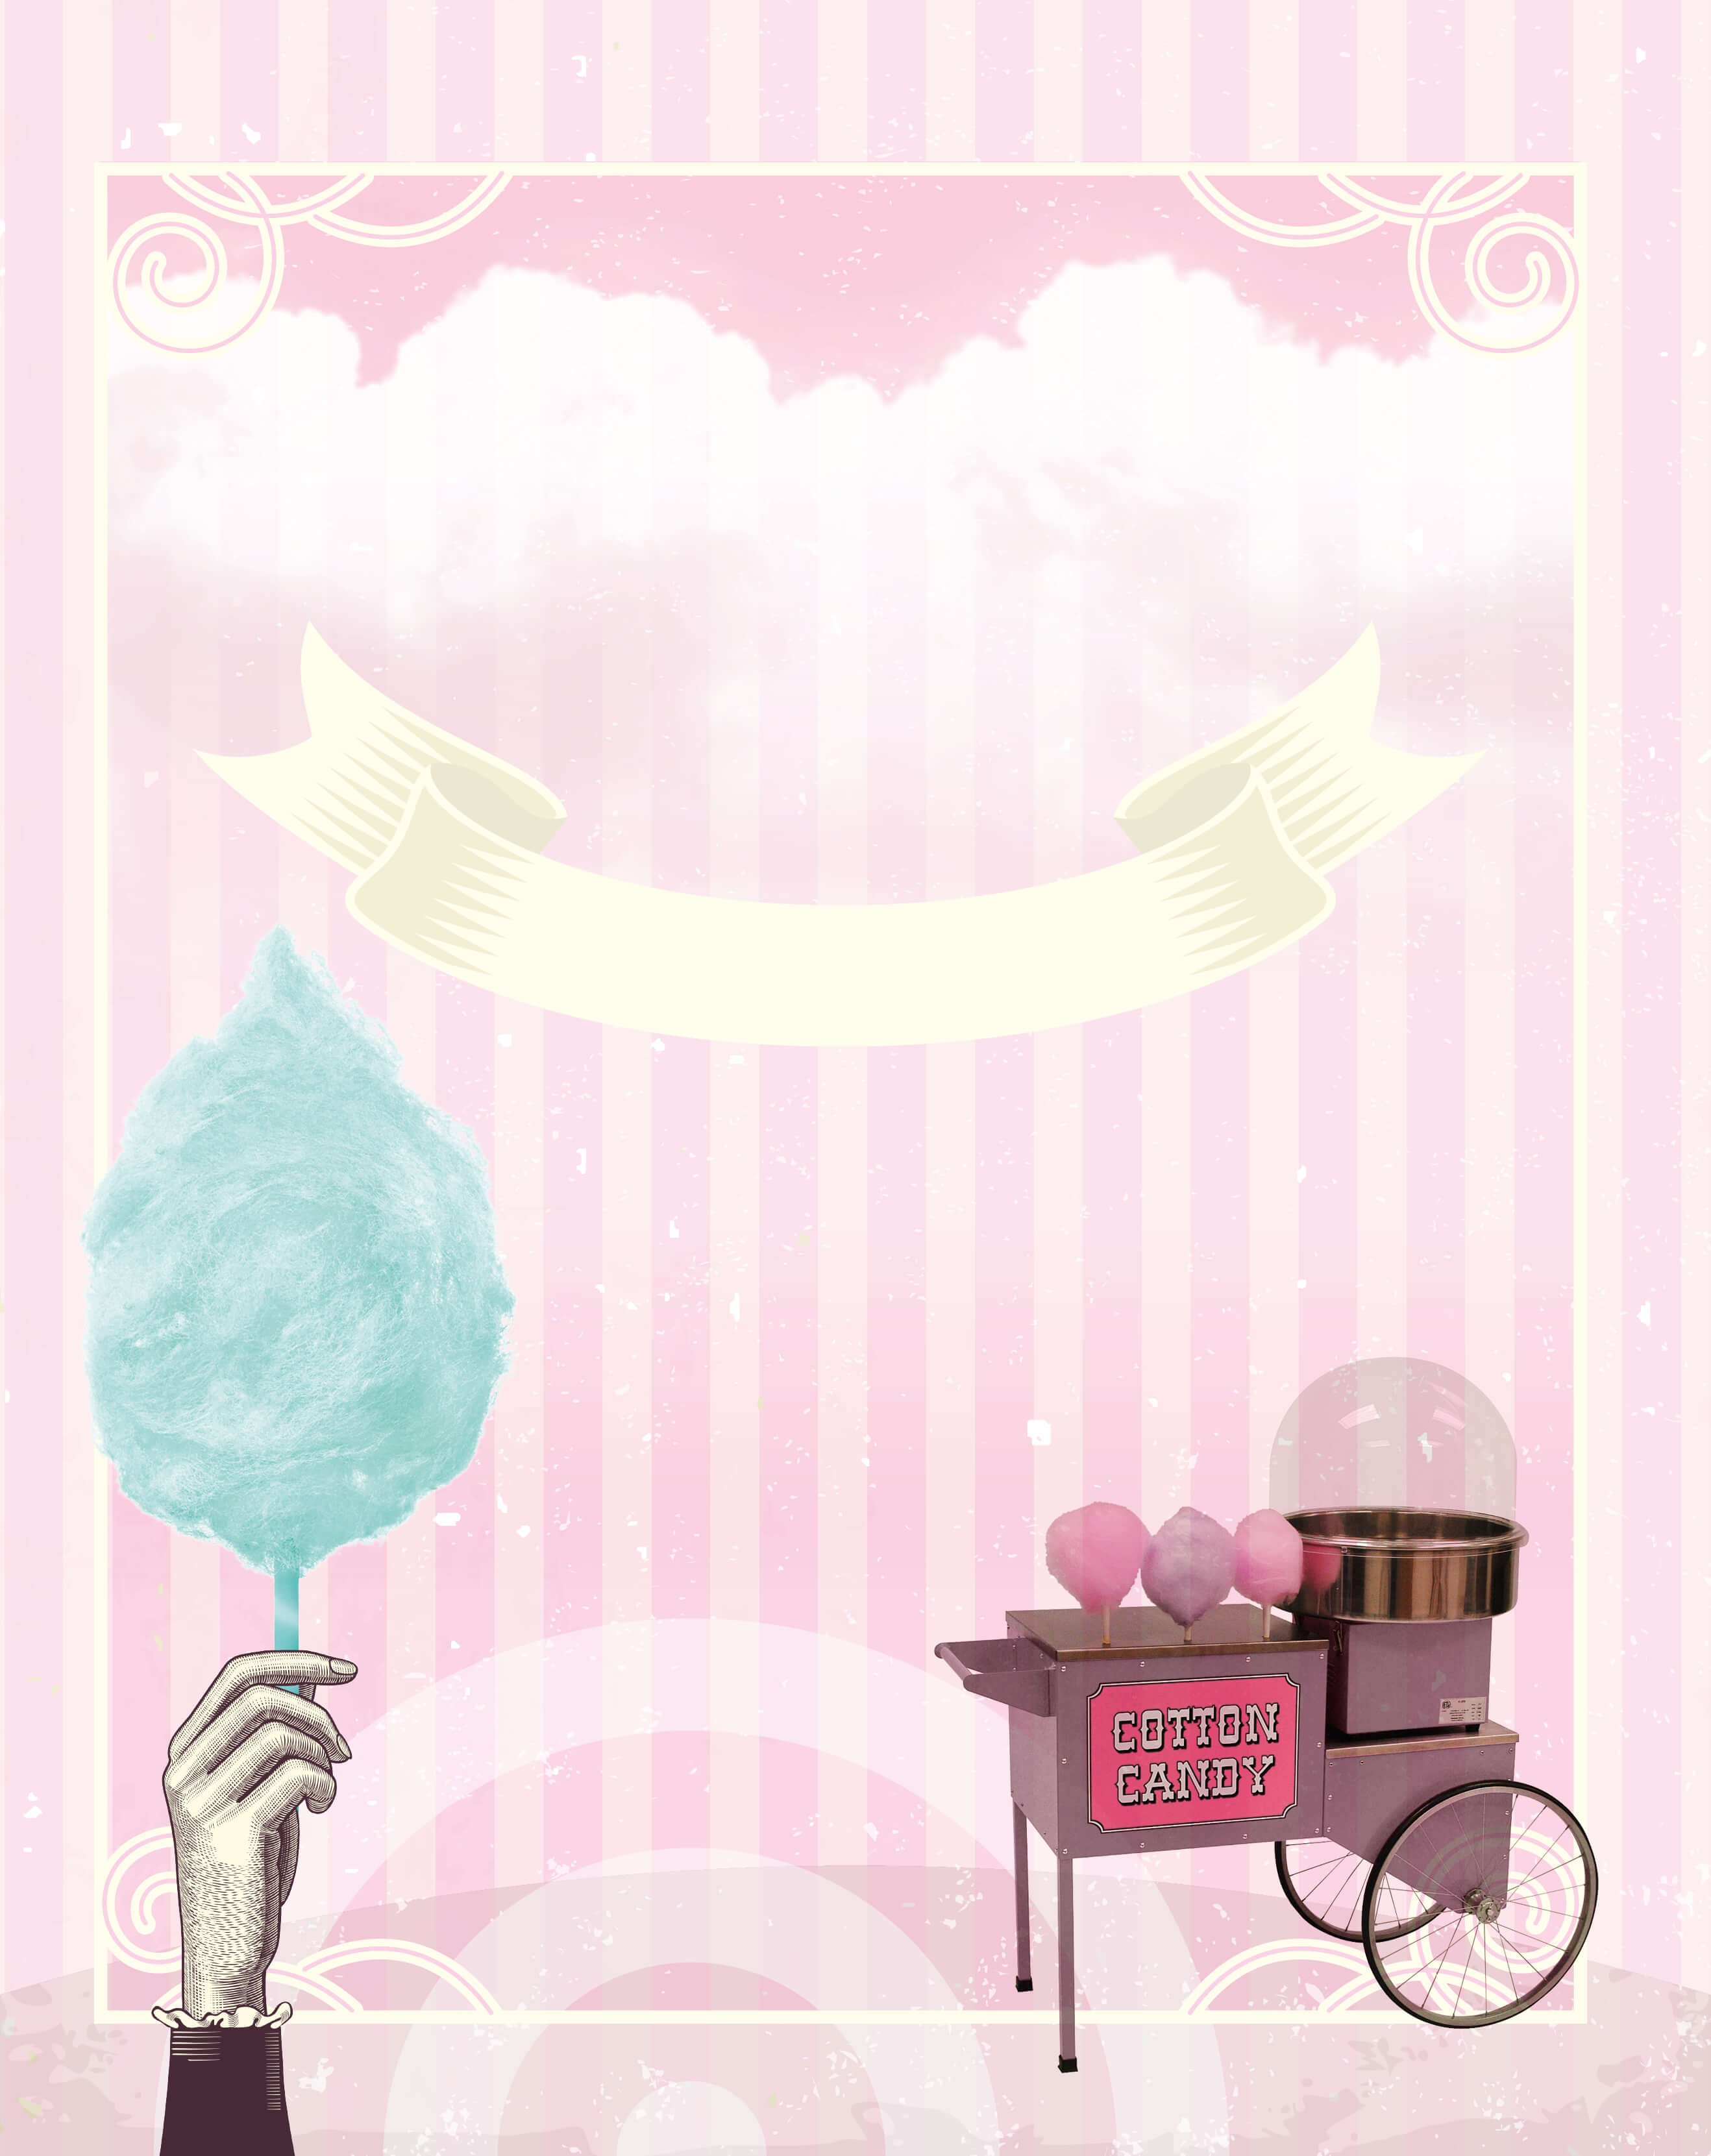 A picture of a candy cart with a blue cotton candy.